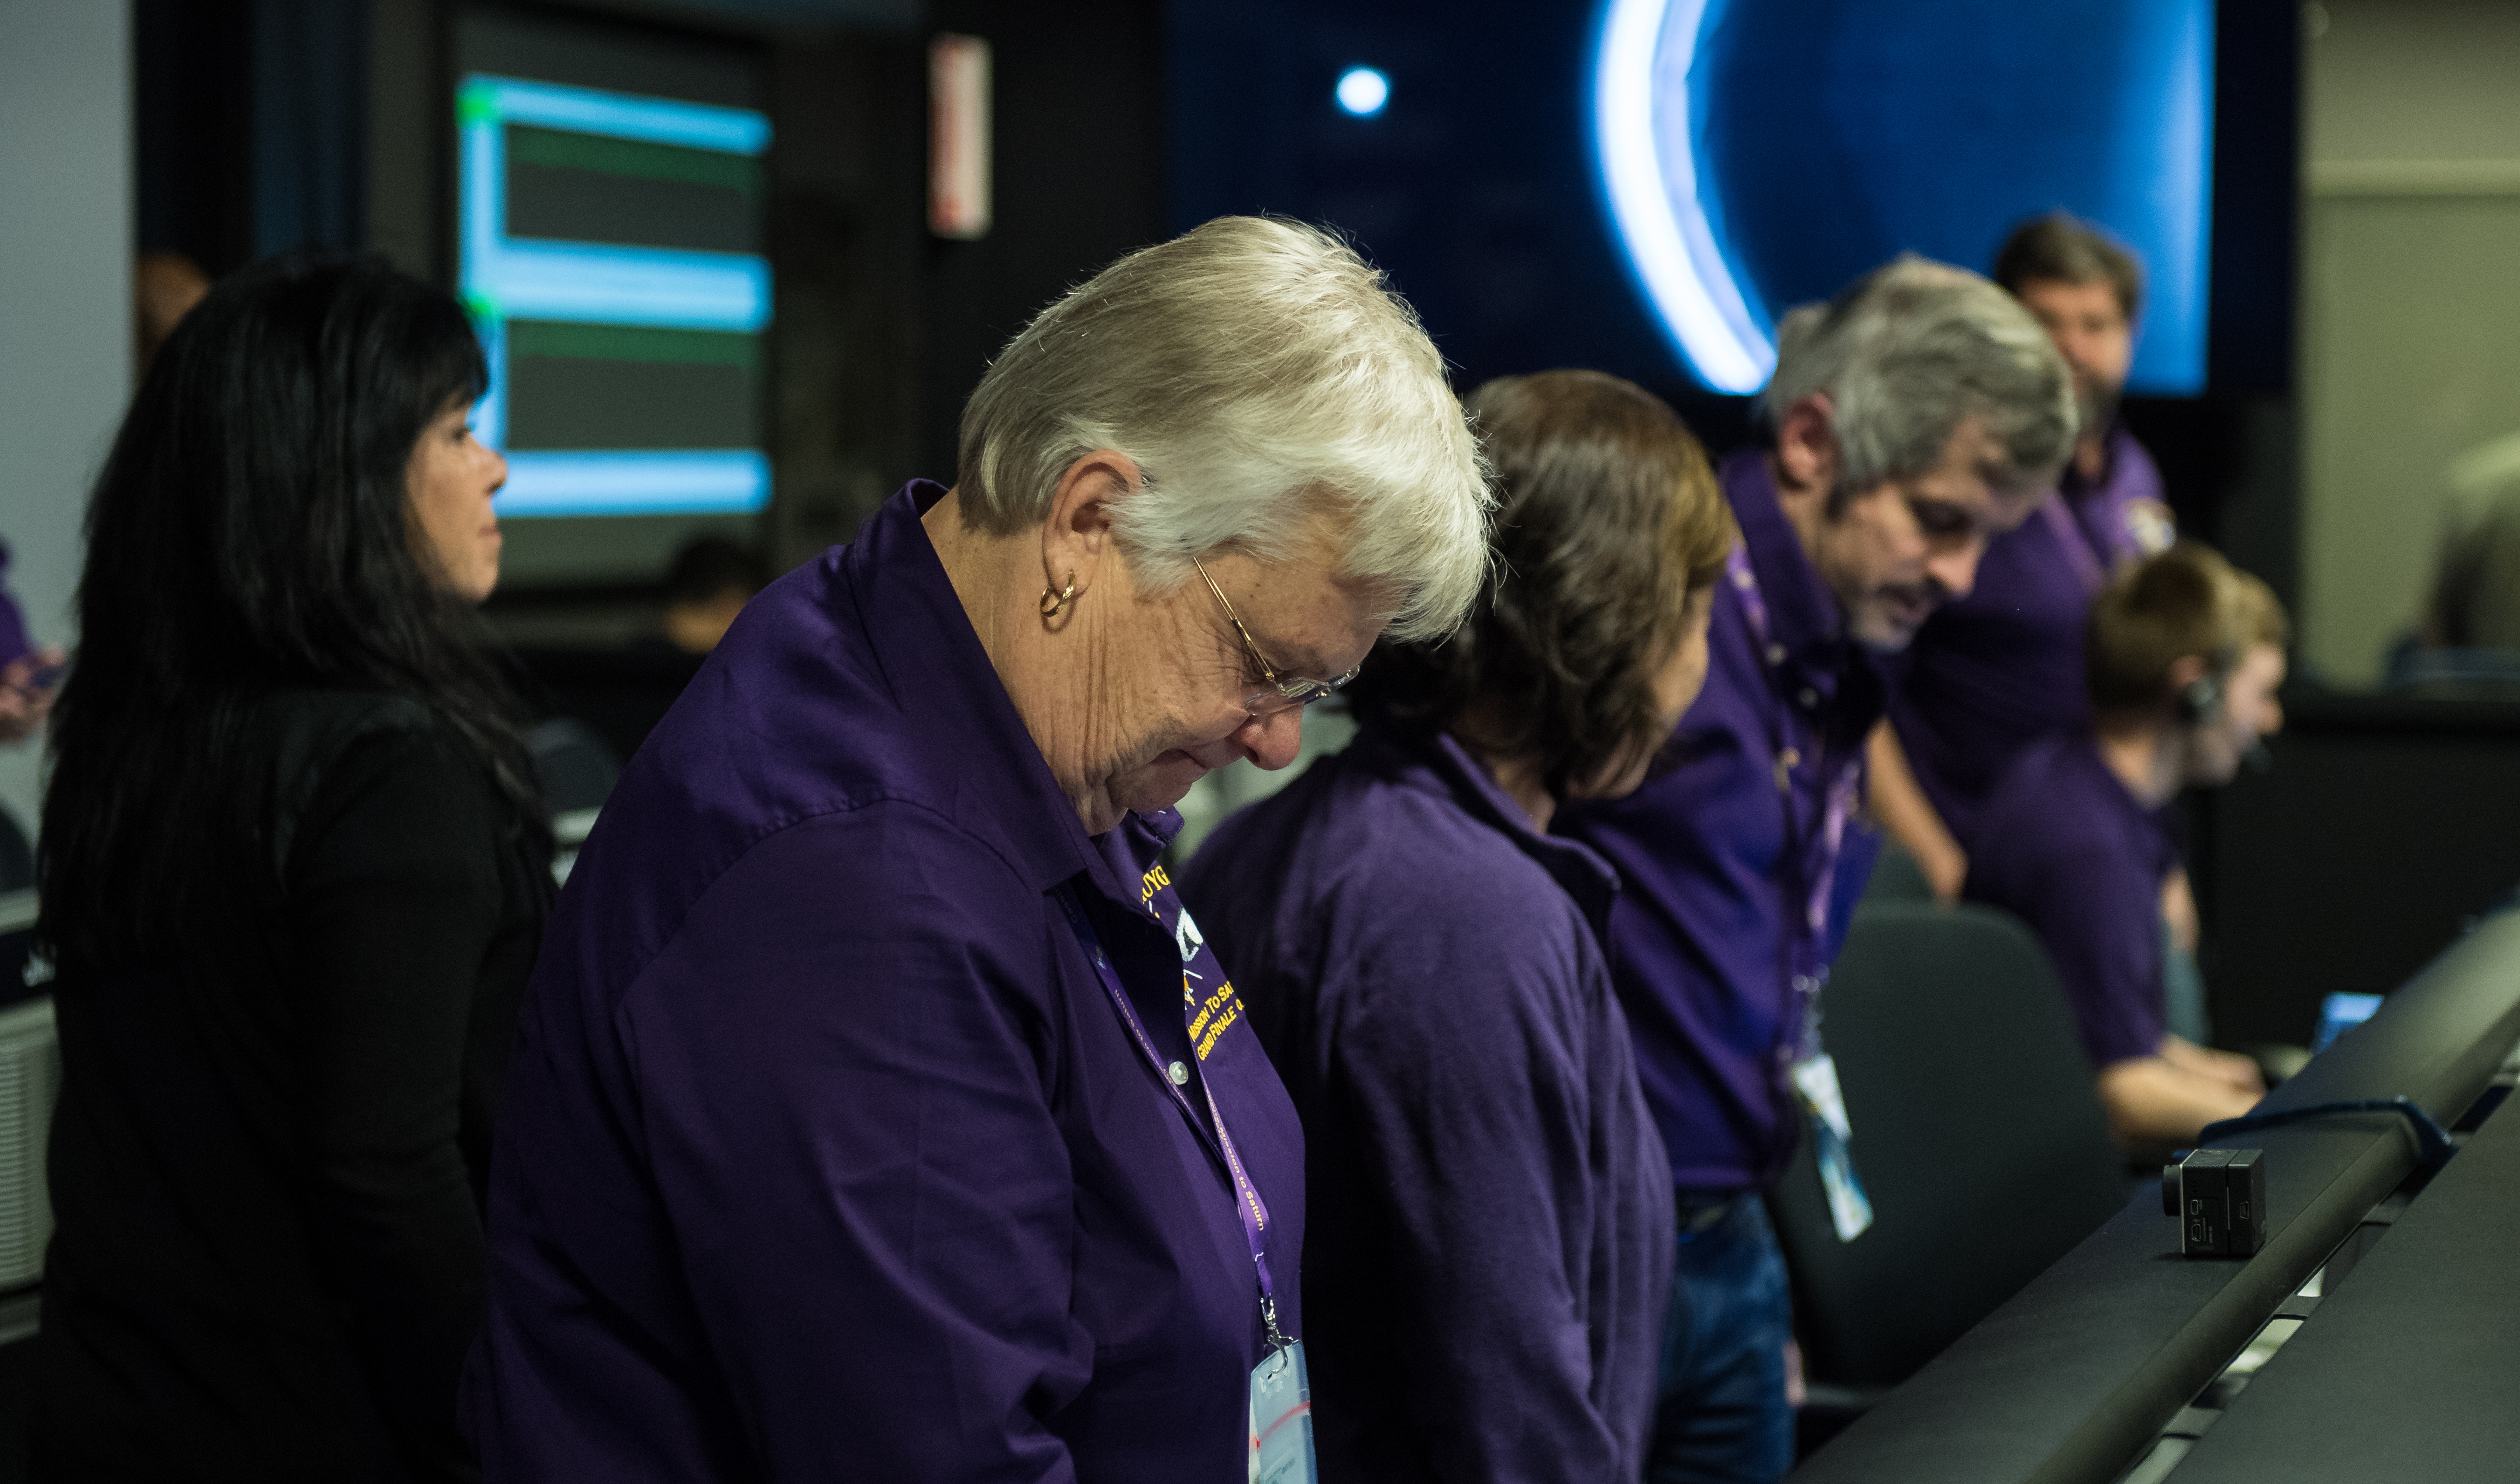 Color image of people in mission control with their heads bowed.